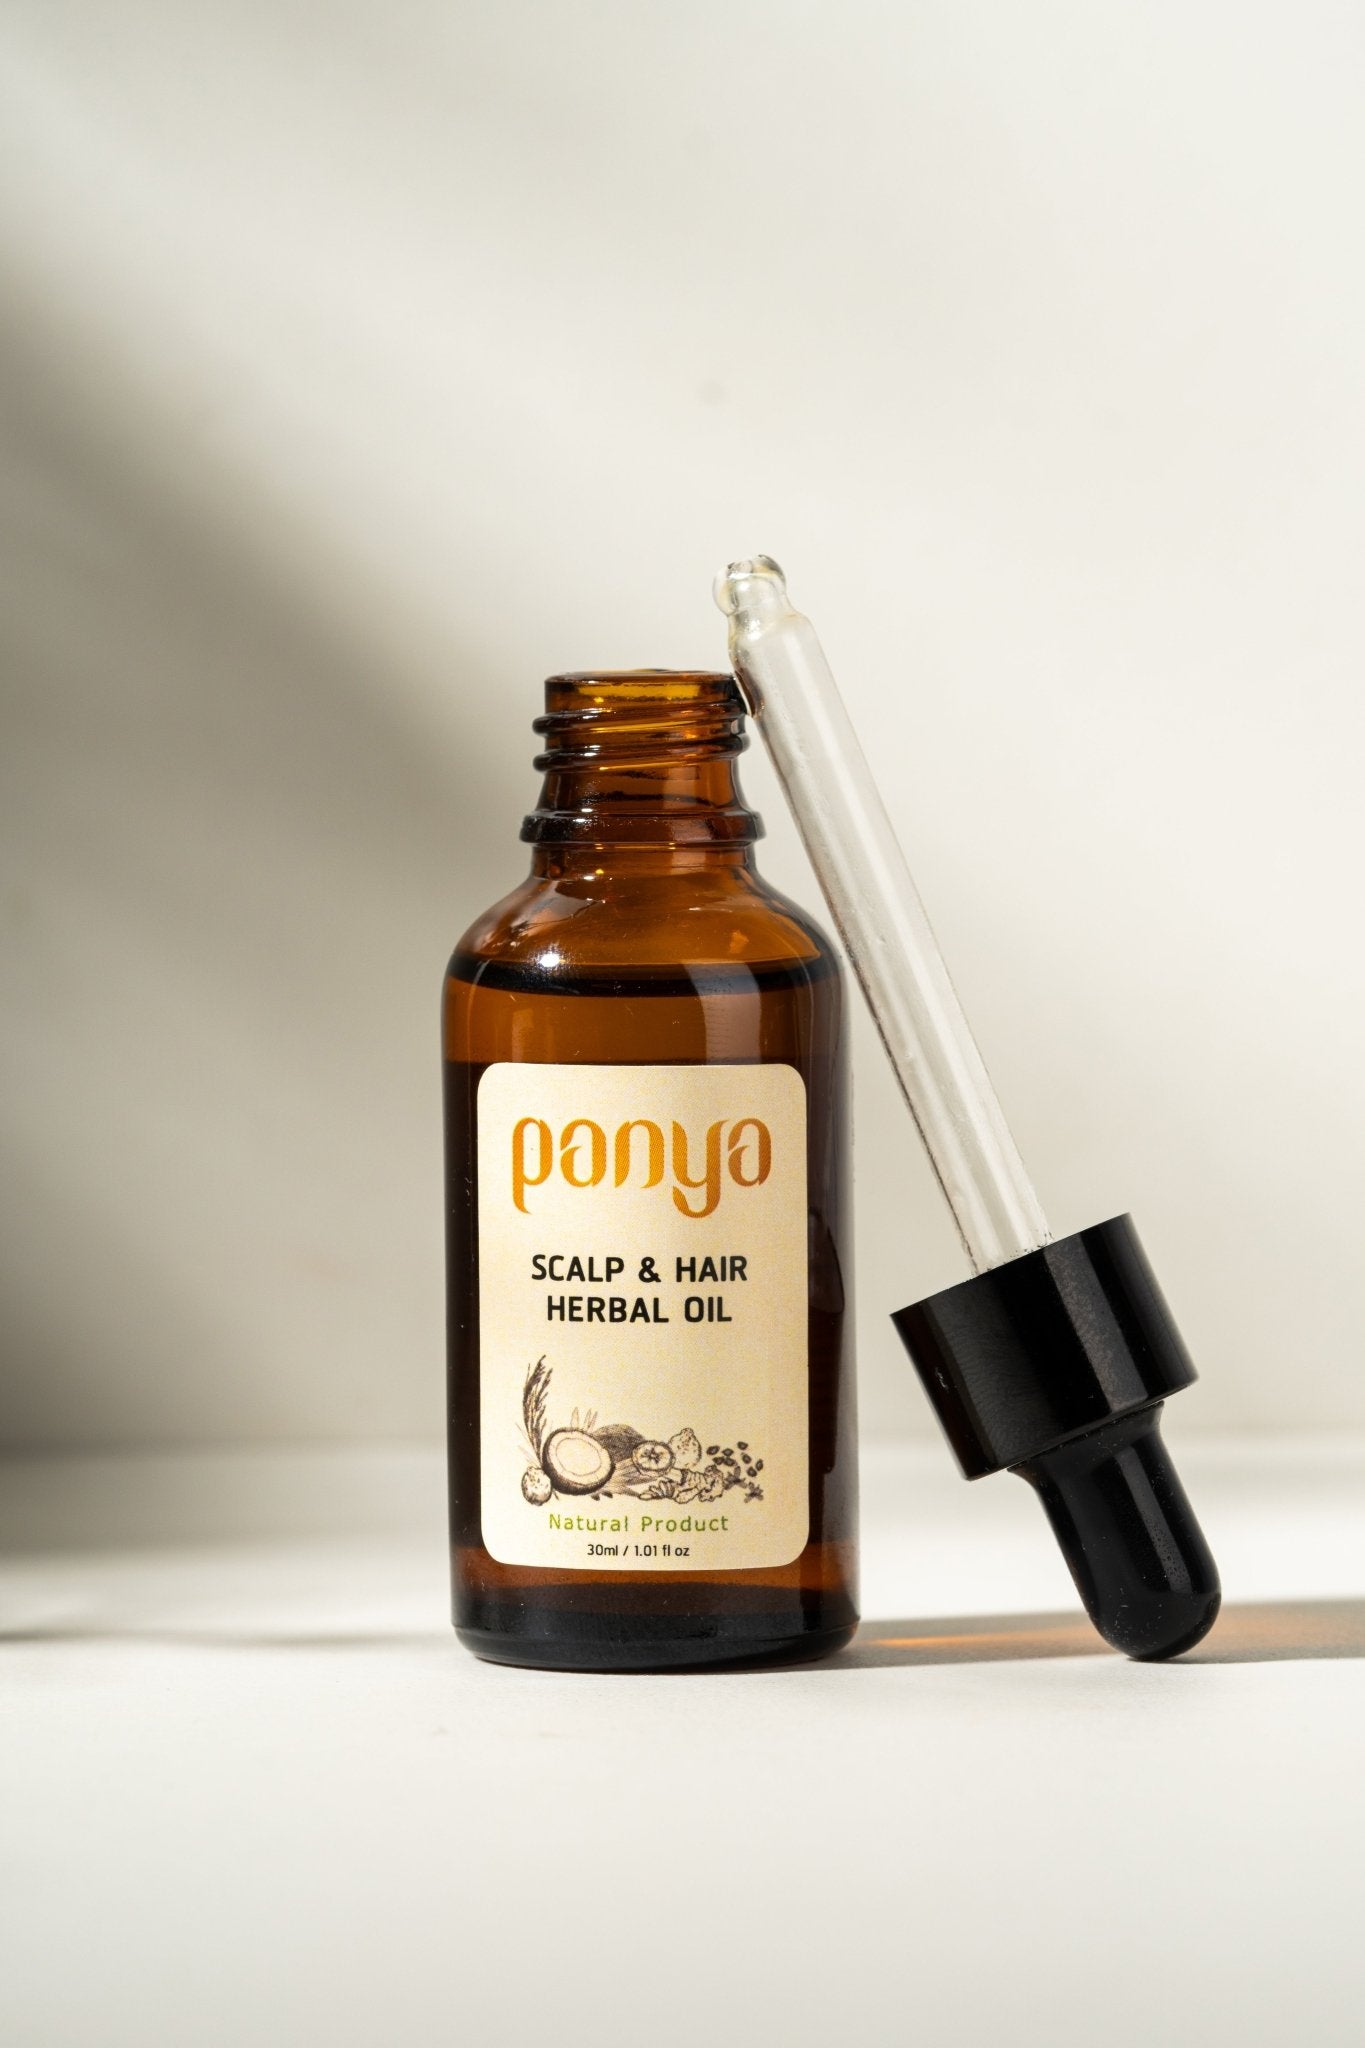 Panya Scalp & Hair Herbal Serum: organic, with cold-extracted Thai Bergamot & other essential Oils for hair growth, anti-dandruff and damage restoration. 